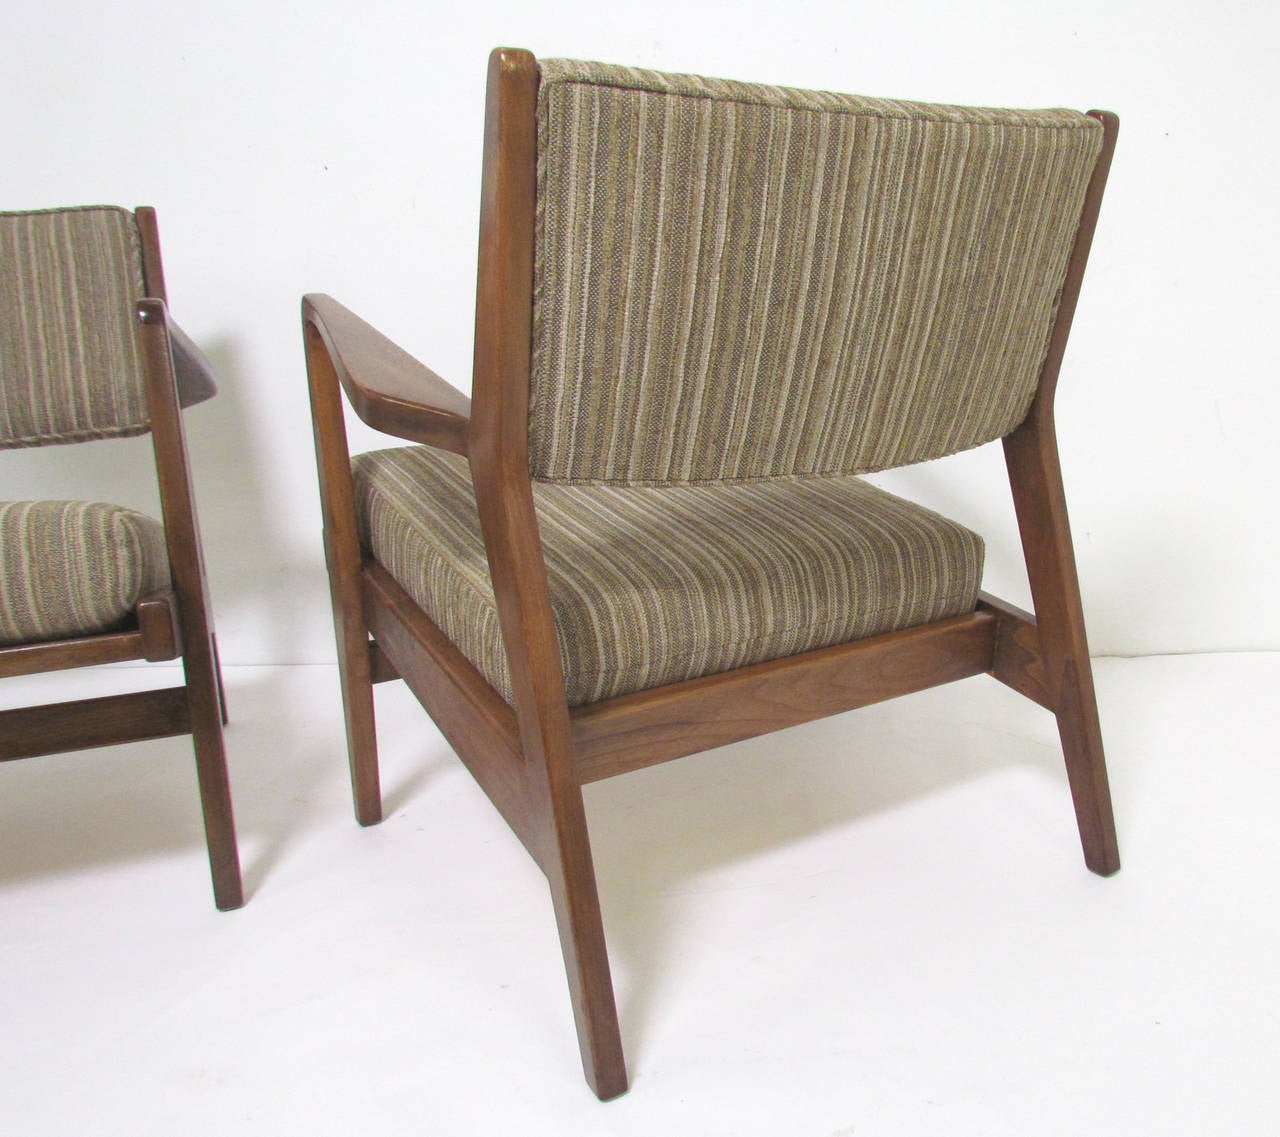 Upholstery Classic Pair of Mid-Century Modern Lounge Armchairs by Jens Risom